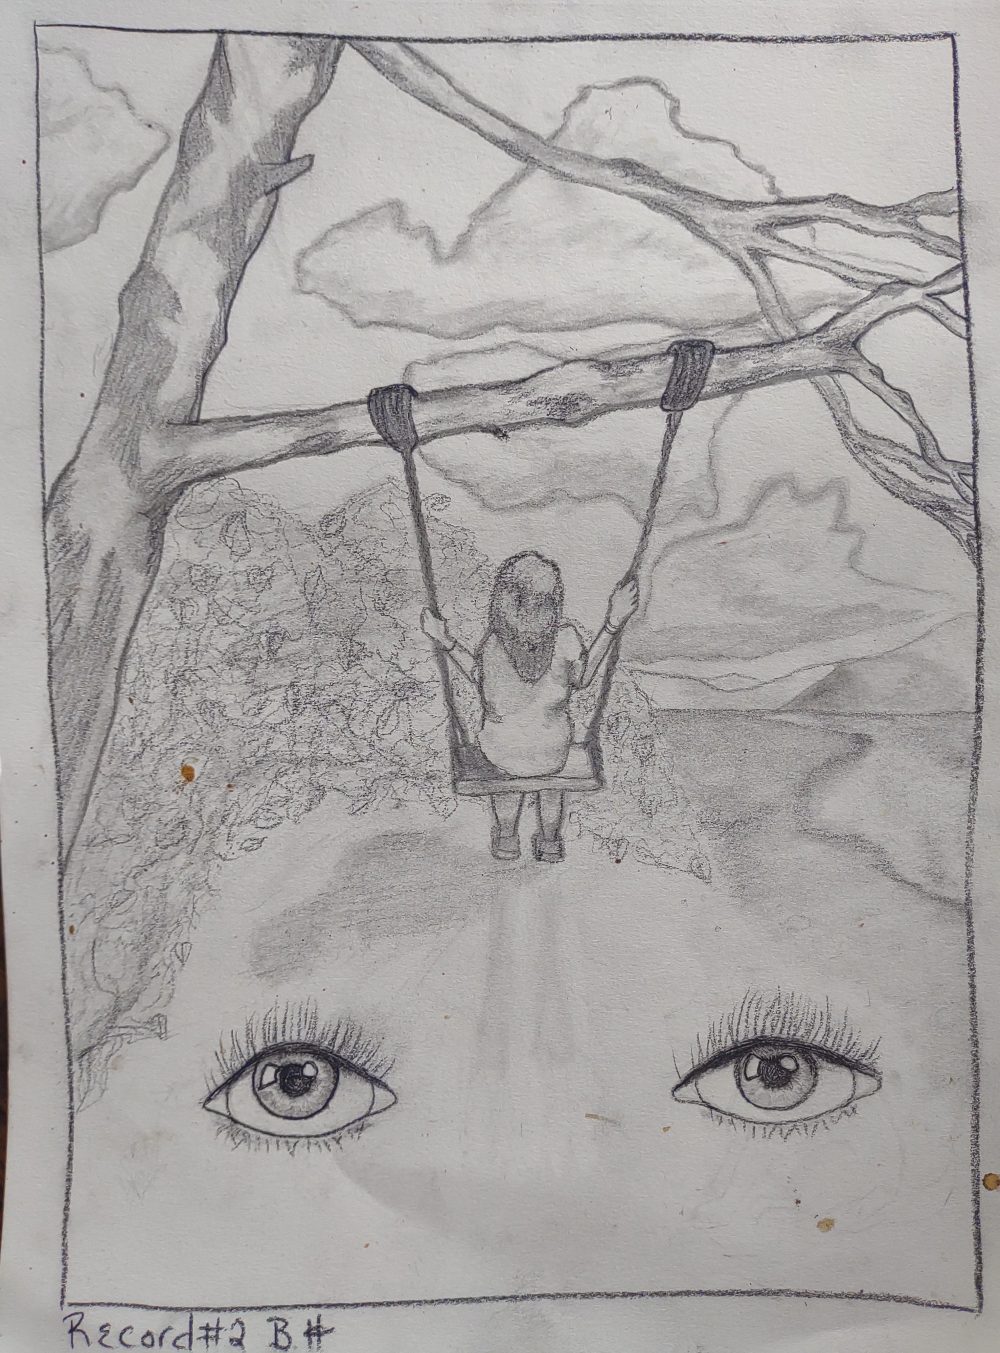 A drawing of a girl on a swing attached to a tree, with two large eyes on the bottom foreground